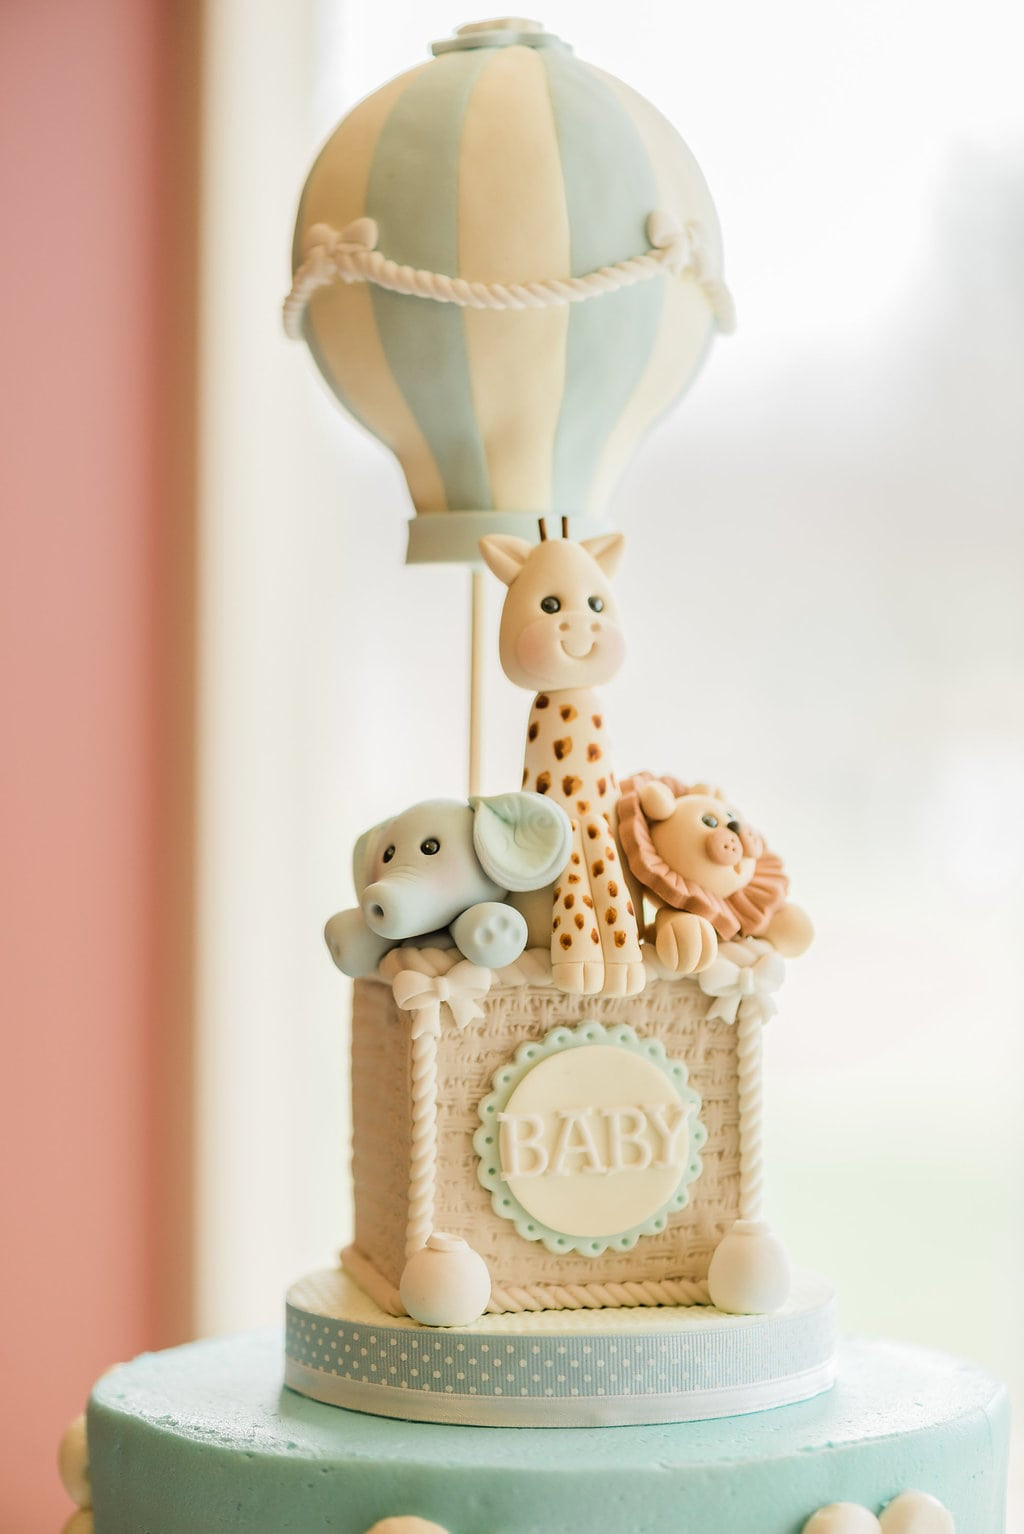 Baby Cake Toppers Party City
 "Up Up and Away " Hot Air Balloon Baby Shower The